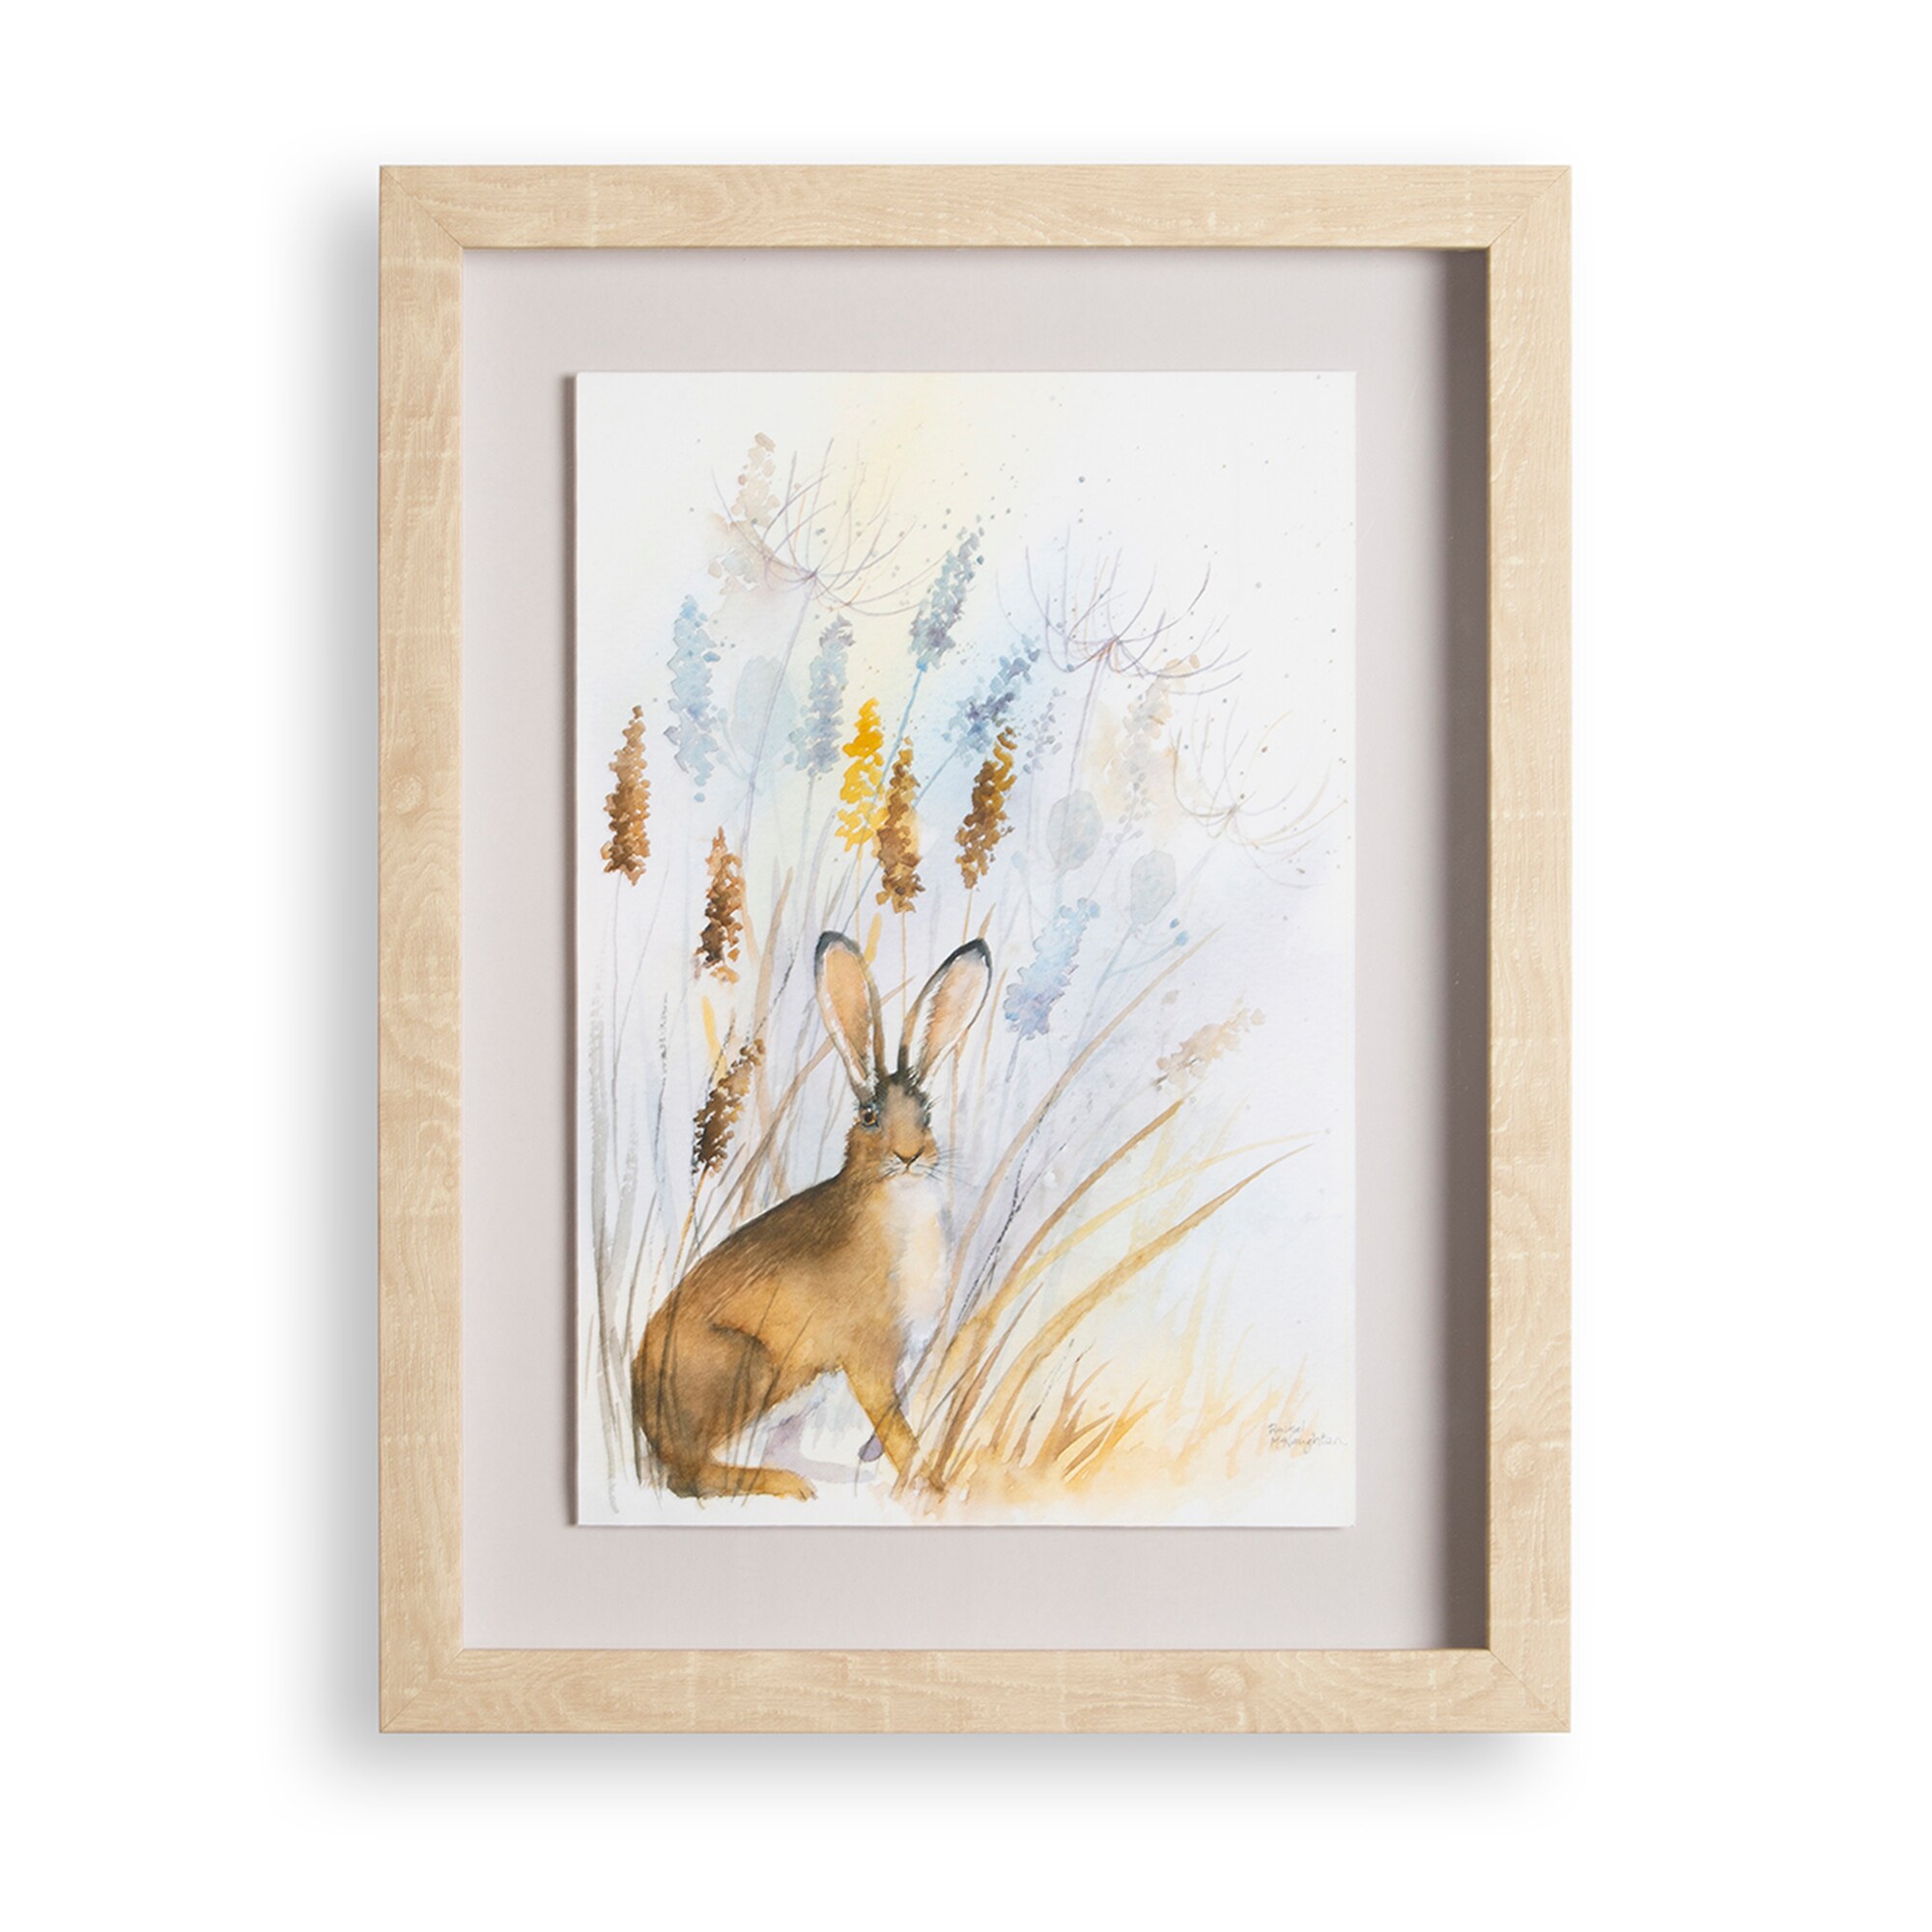 Hare Rabbit Nature Countryside Art Print Antique Effect Paper No Frame Included 